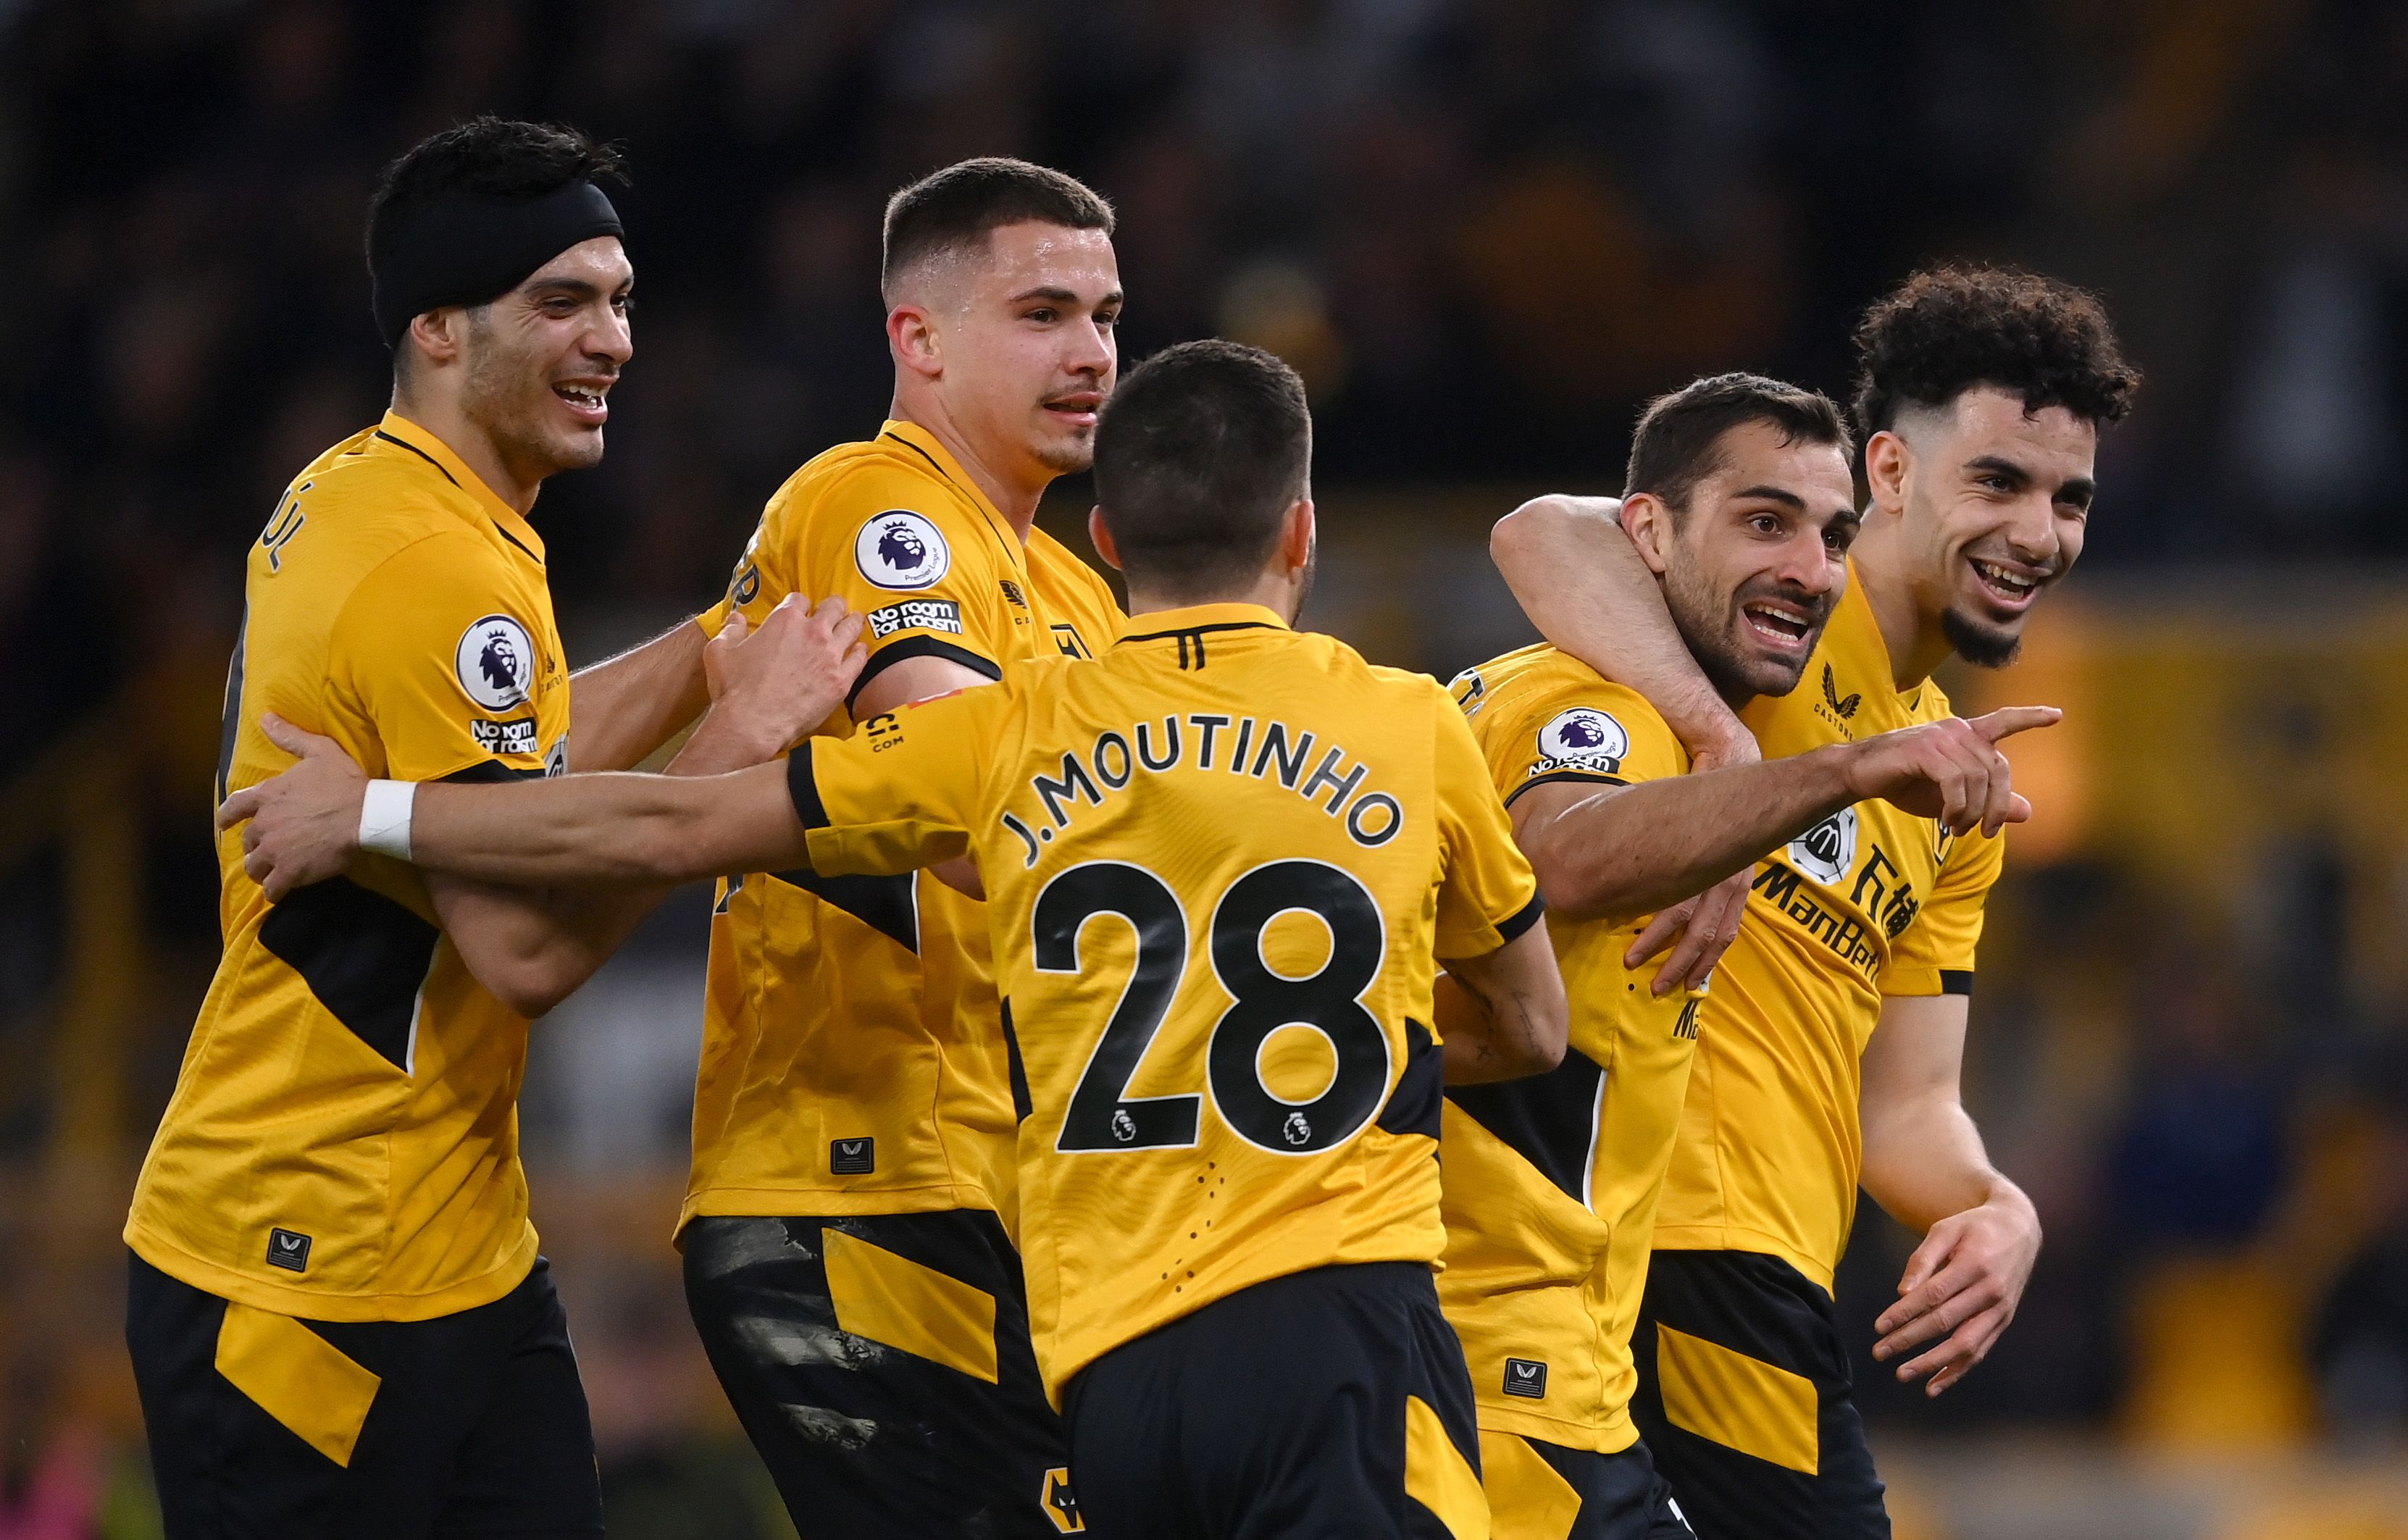 Jonny Otto of Wolverhampton Wanderers celebrates after scoring their side's first goal with team mates during the Premier League match between Wolverhampton Wanderers and Leeds United